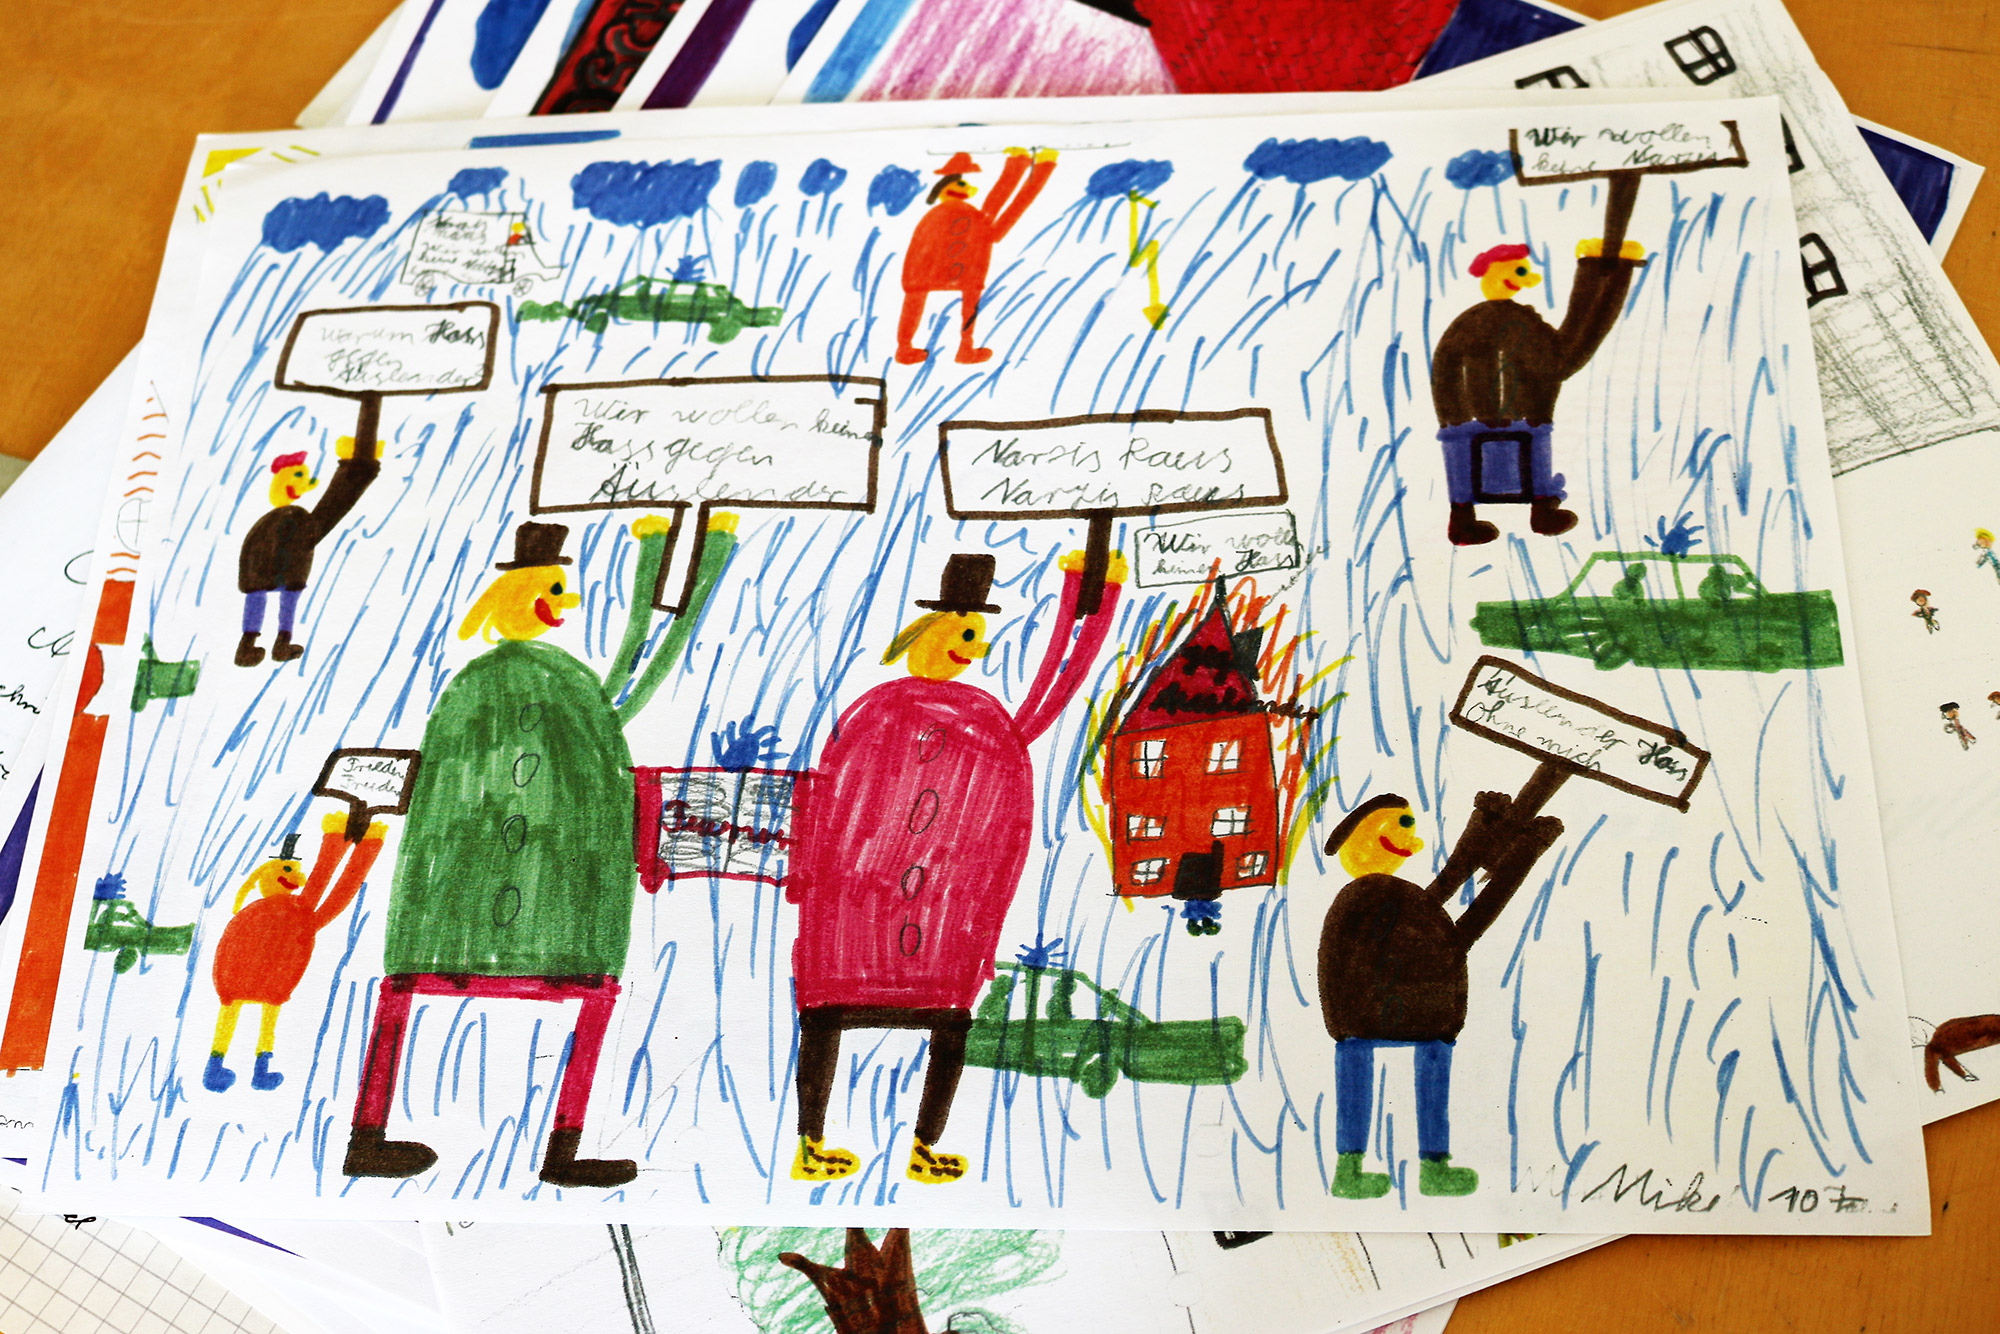 The "Möllner Briefe" also contain drawings by children. Photo: DOMiD-Archiv, Cologne [These photos are only released royalty-free in the context of media coverage of the "Möllner Briefe". For queries and high-resolution photos, please contact our press office].